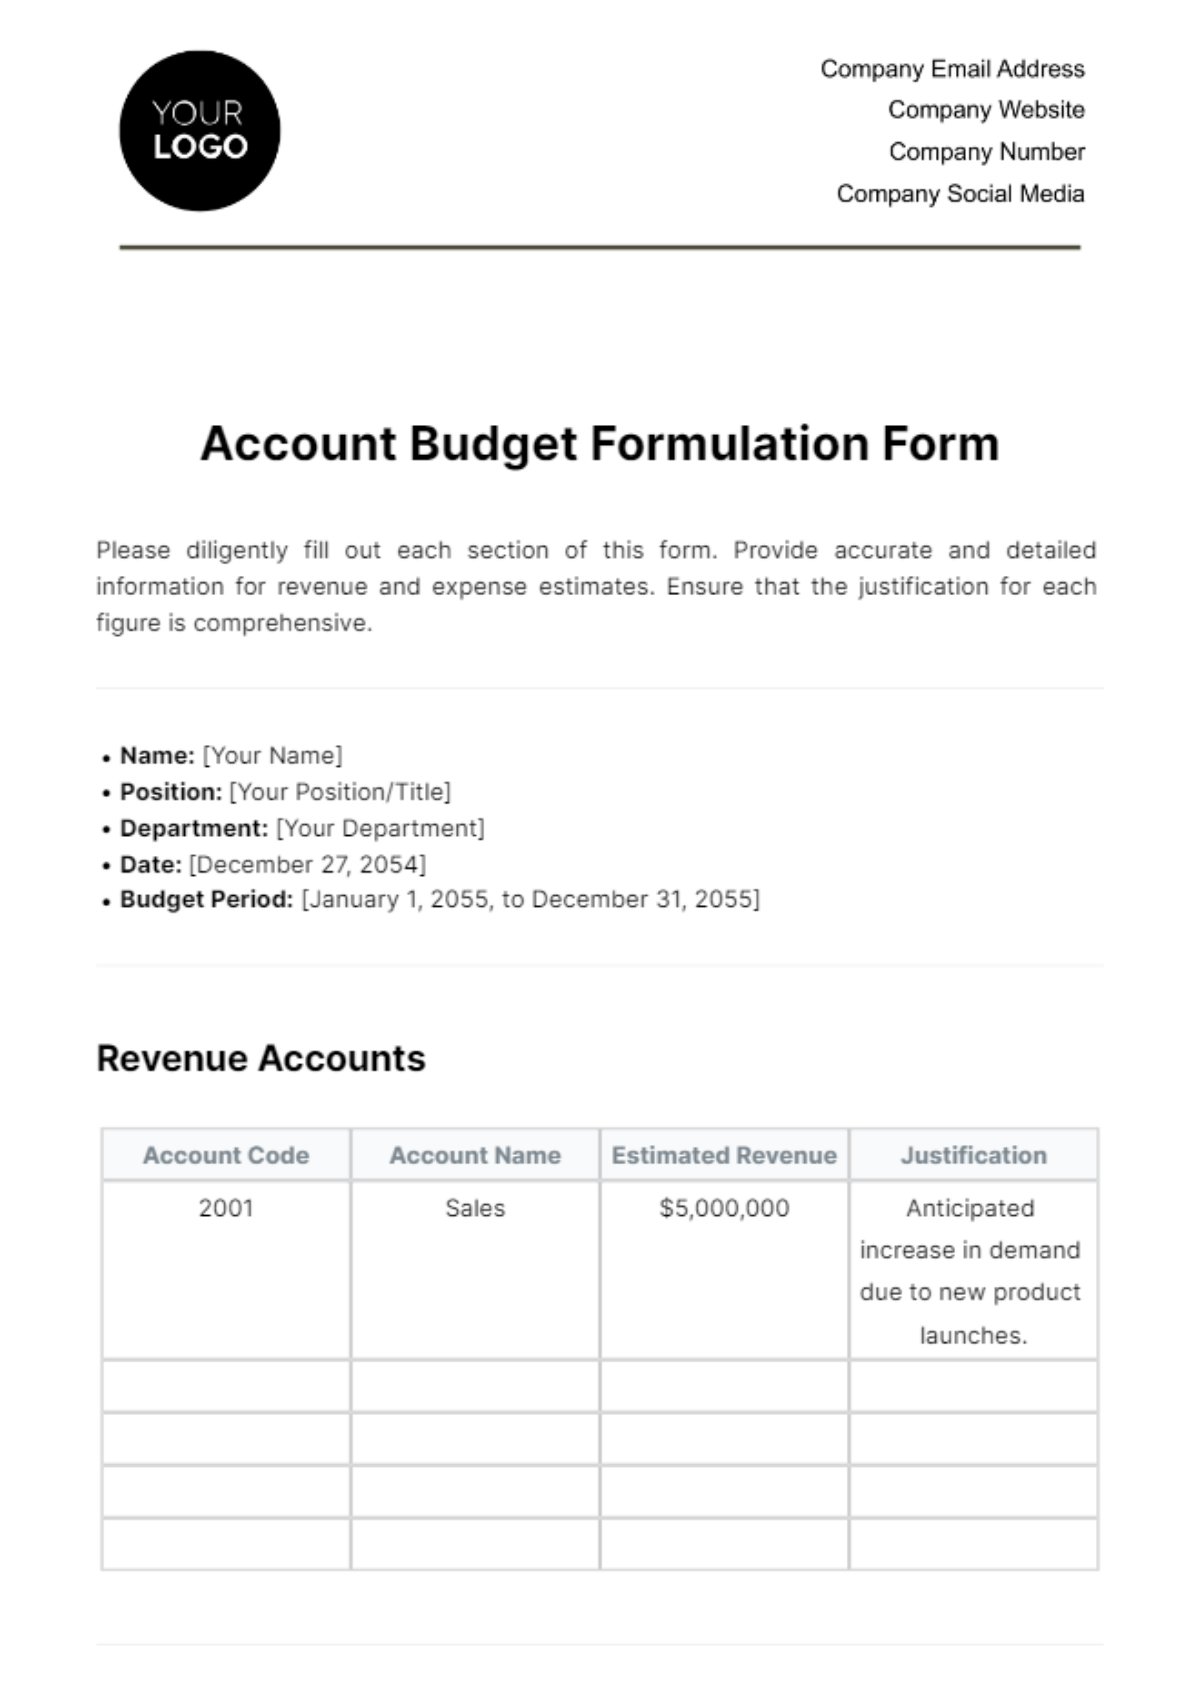 Free Account Budget Formulation Form Template